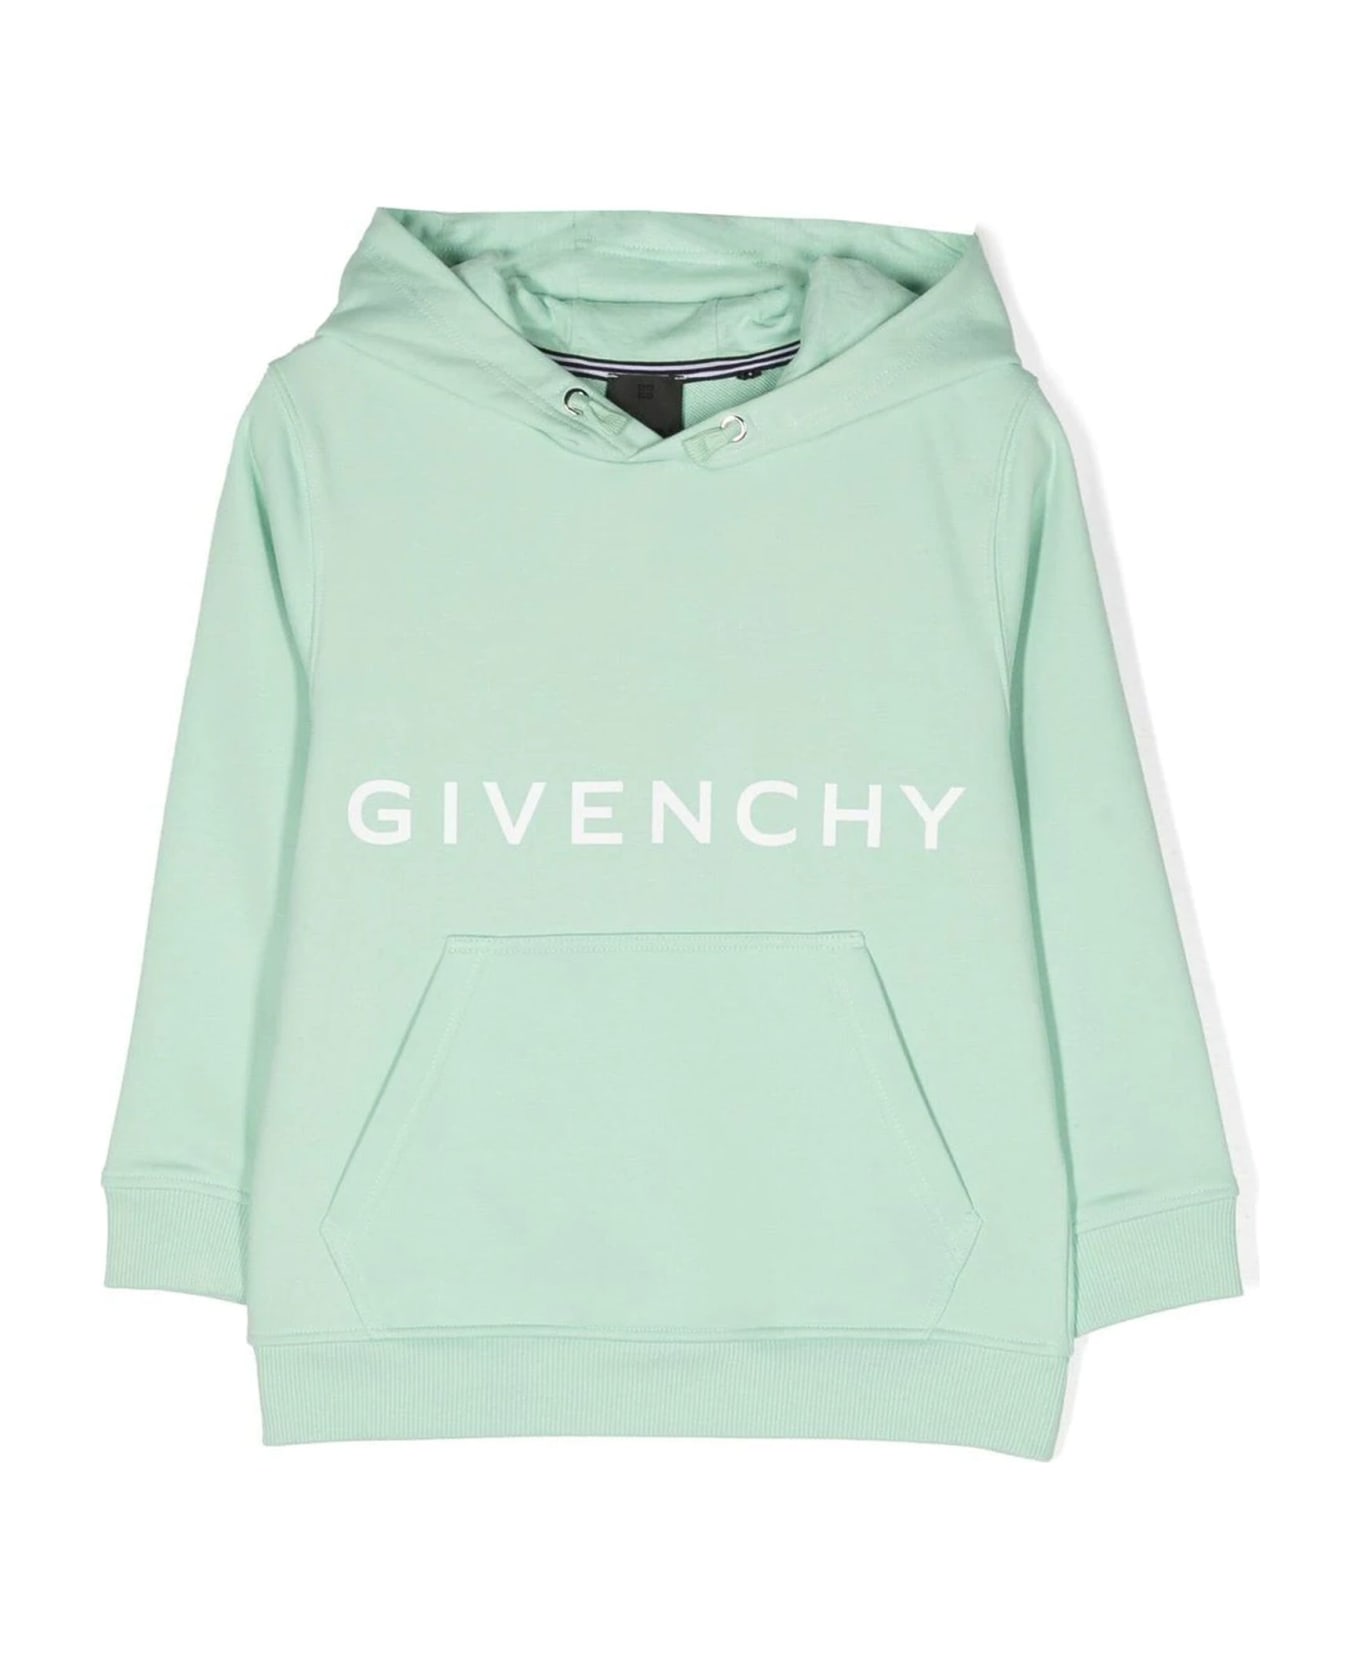 Givenchy Green Cotton Hoodie - Verde